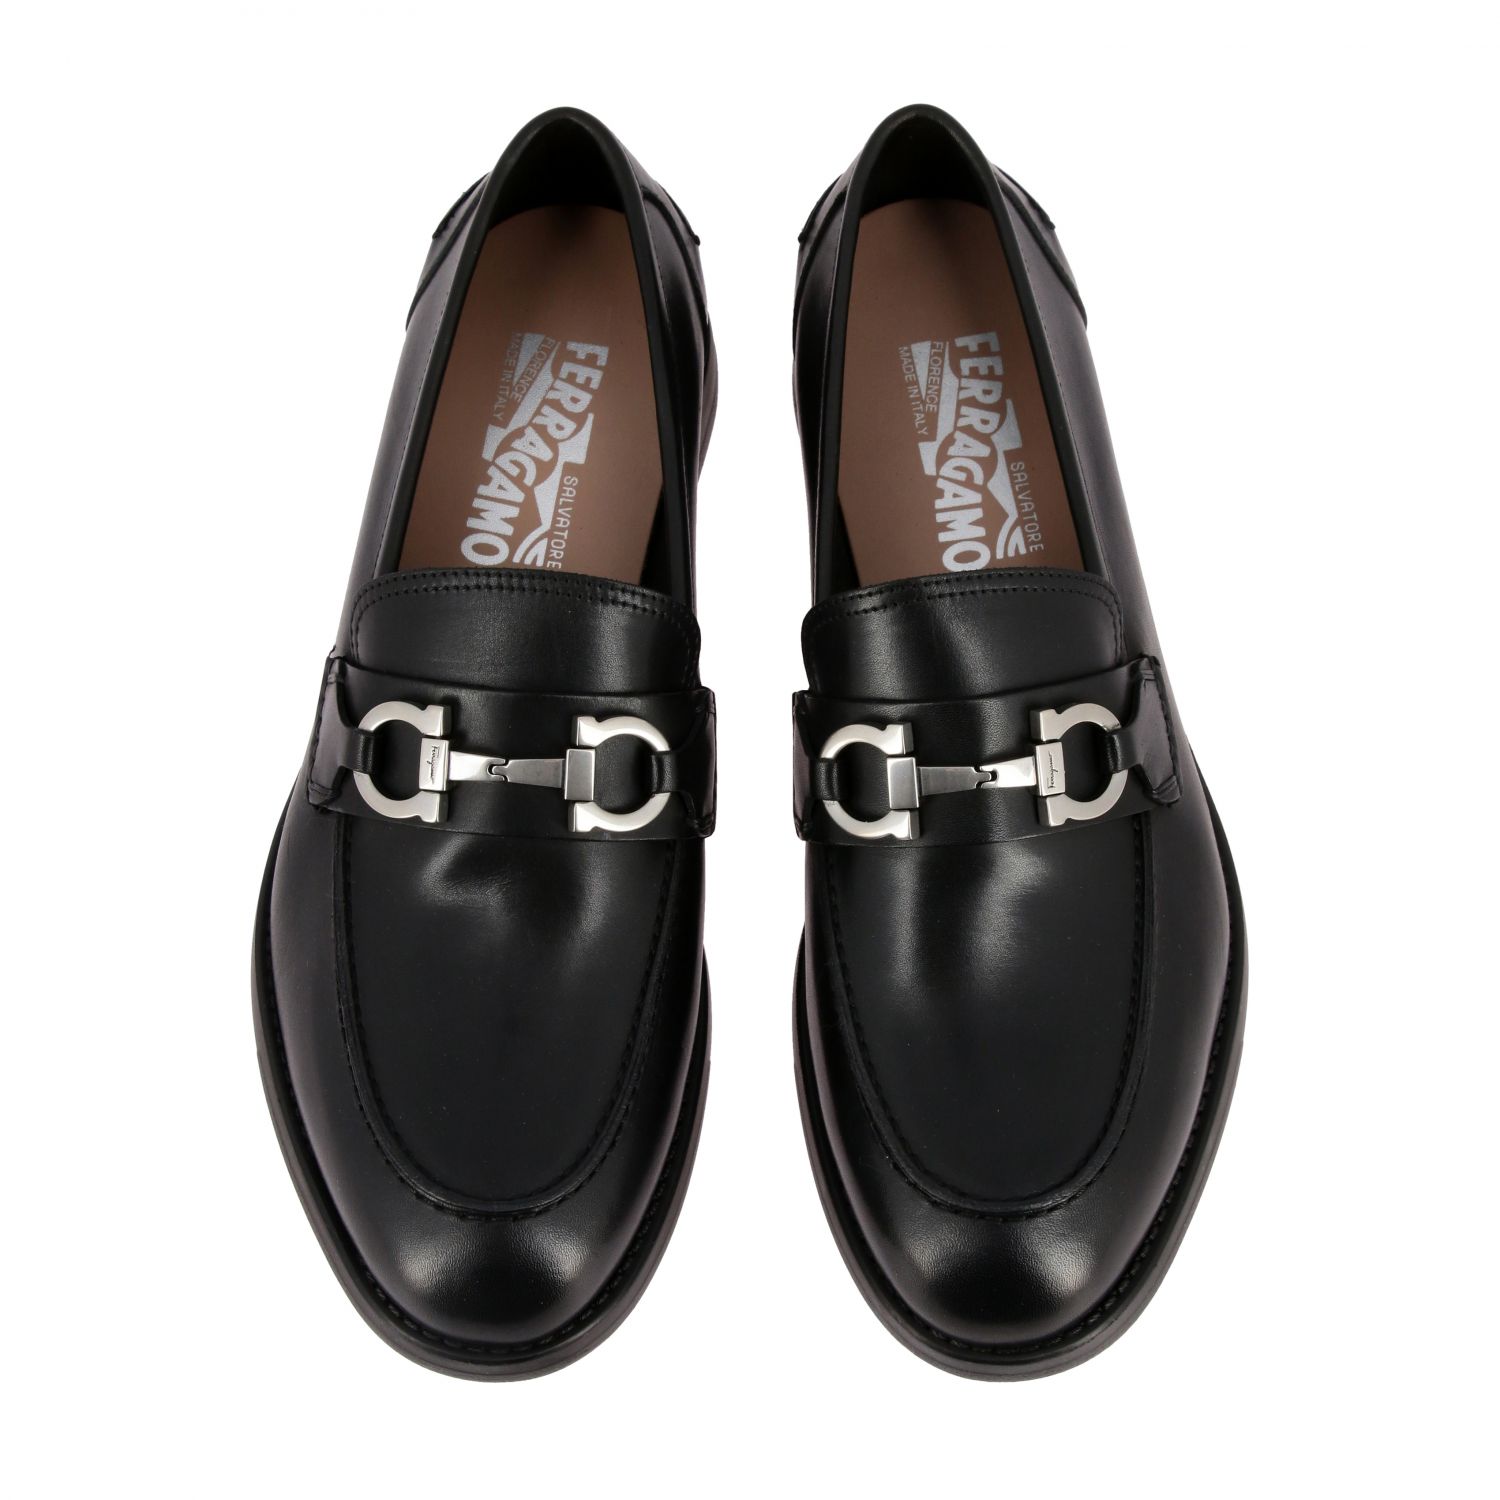 Salvatore Ferragamo Outlet: Ayden 2 loafer in leather | Loafers ...